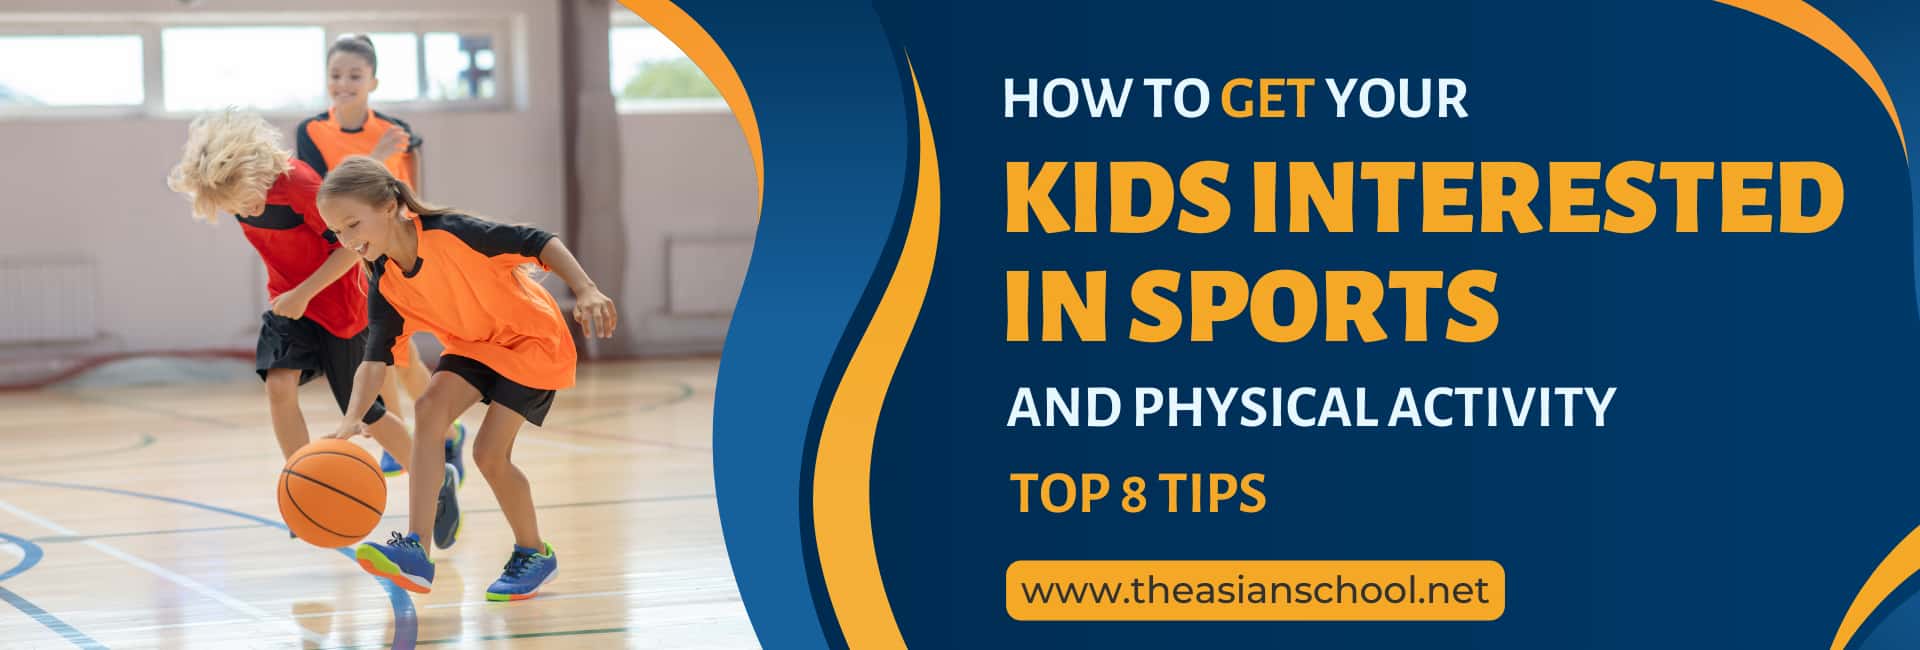 How To Get Your Kids Interested in Sports and Physical Activity Top 8 Tips